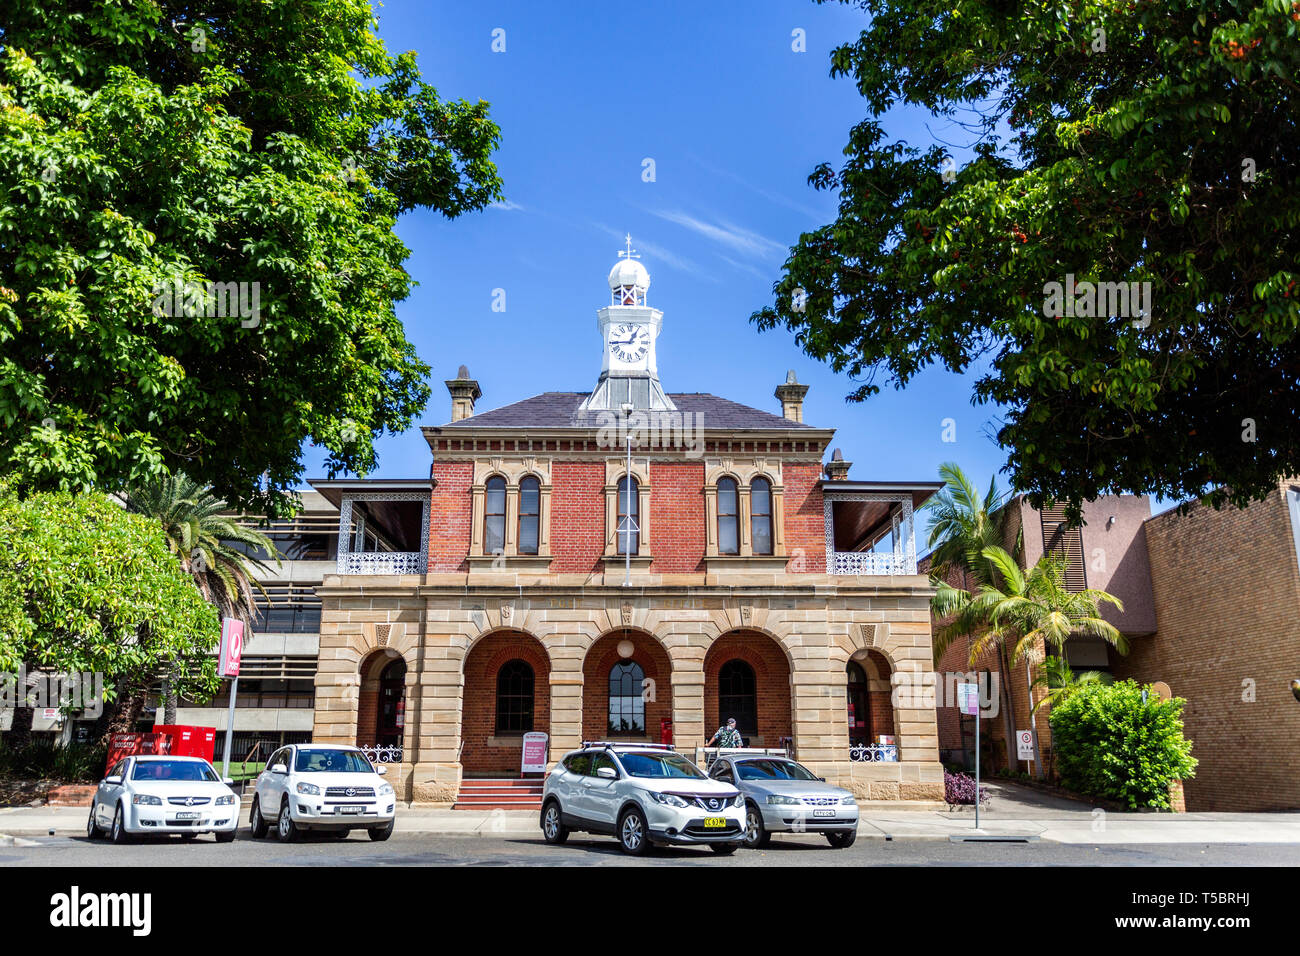 Facade of the heritage building of the Post Office, built in 1874 with sombre sandstone colonnades and local bricks, in central Grafton, a town in nor Stock Photo